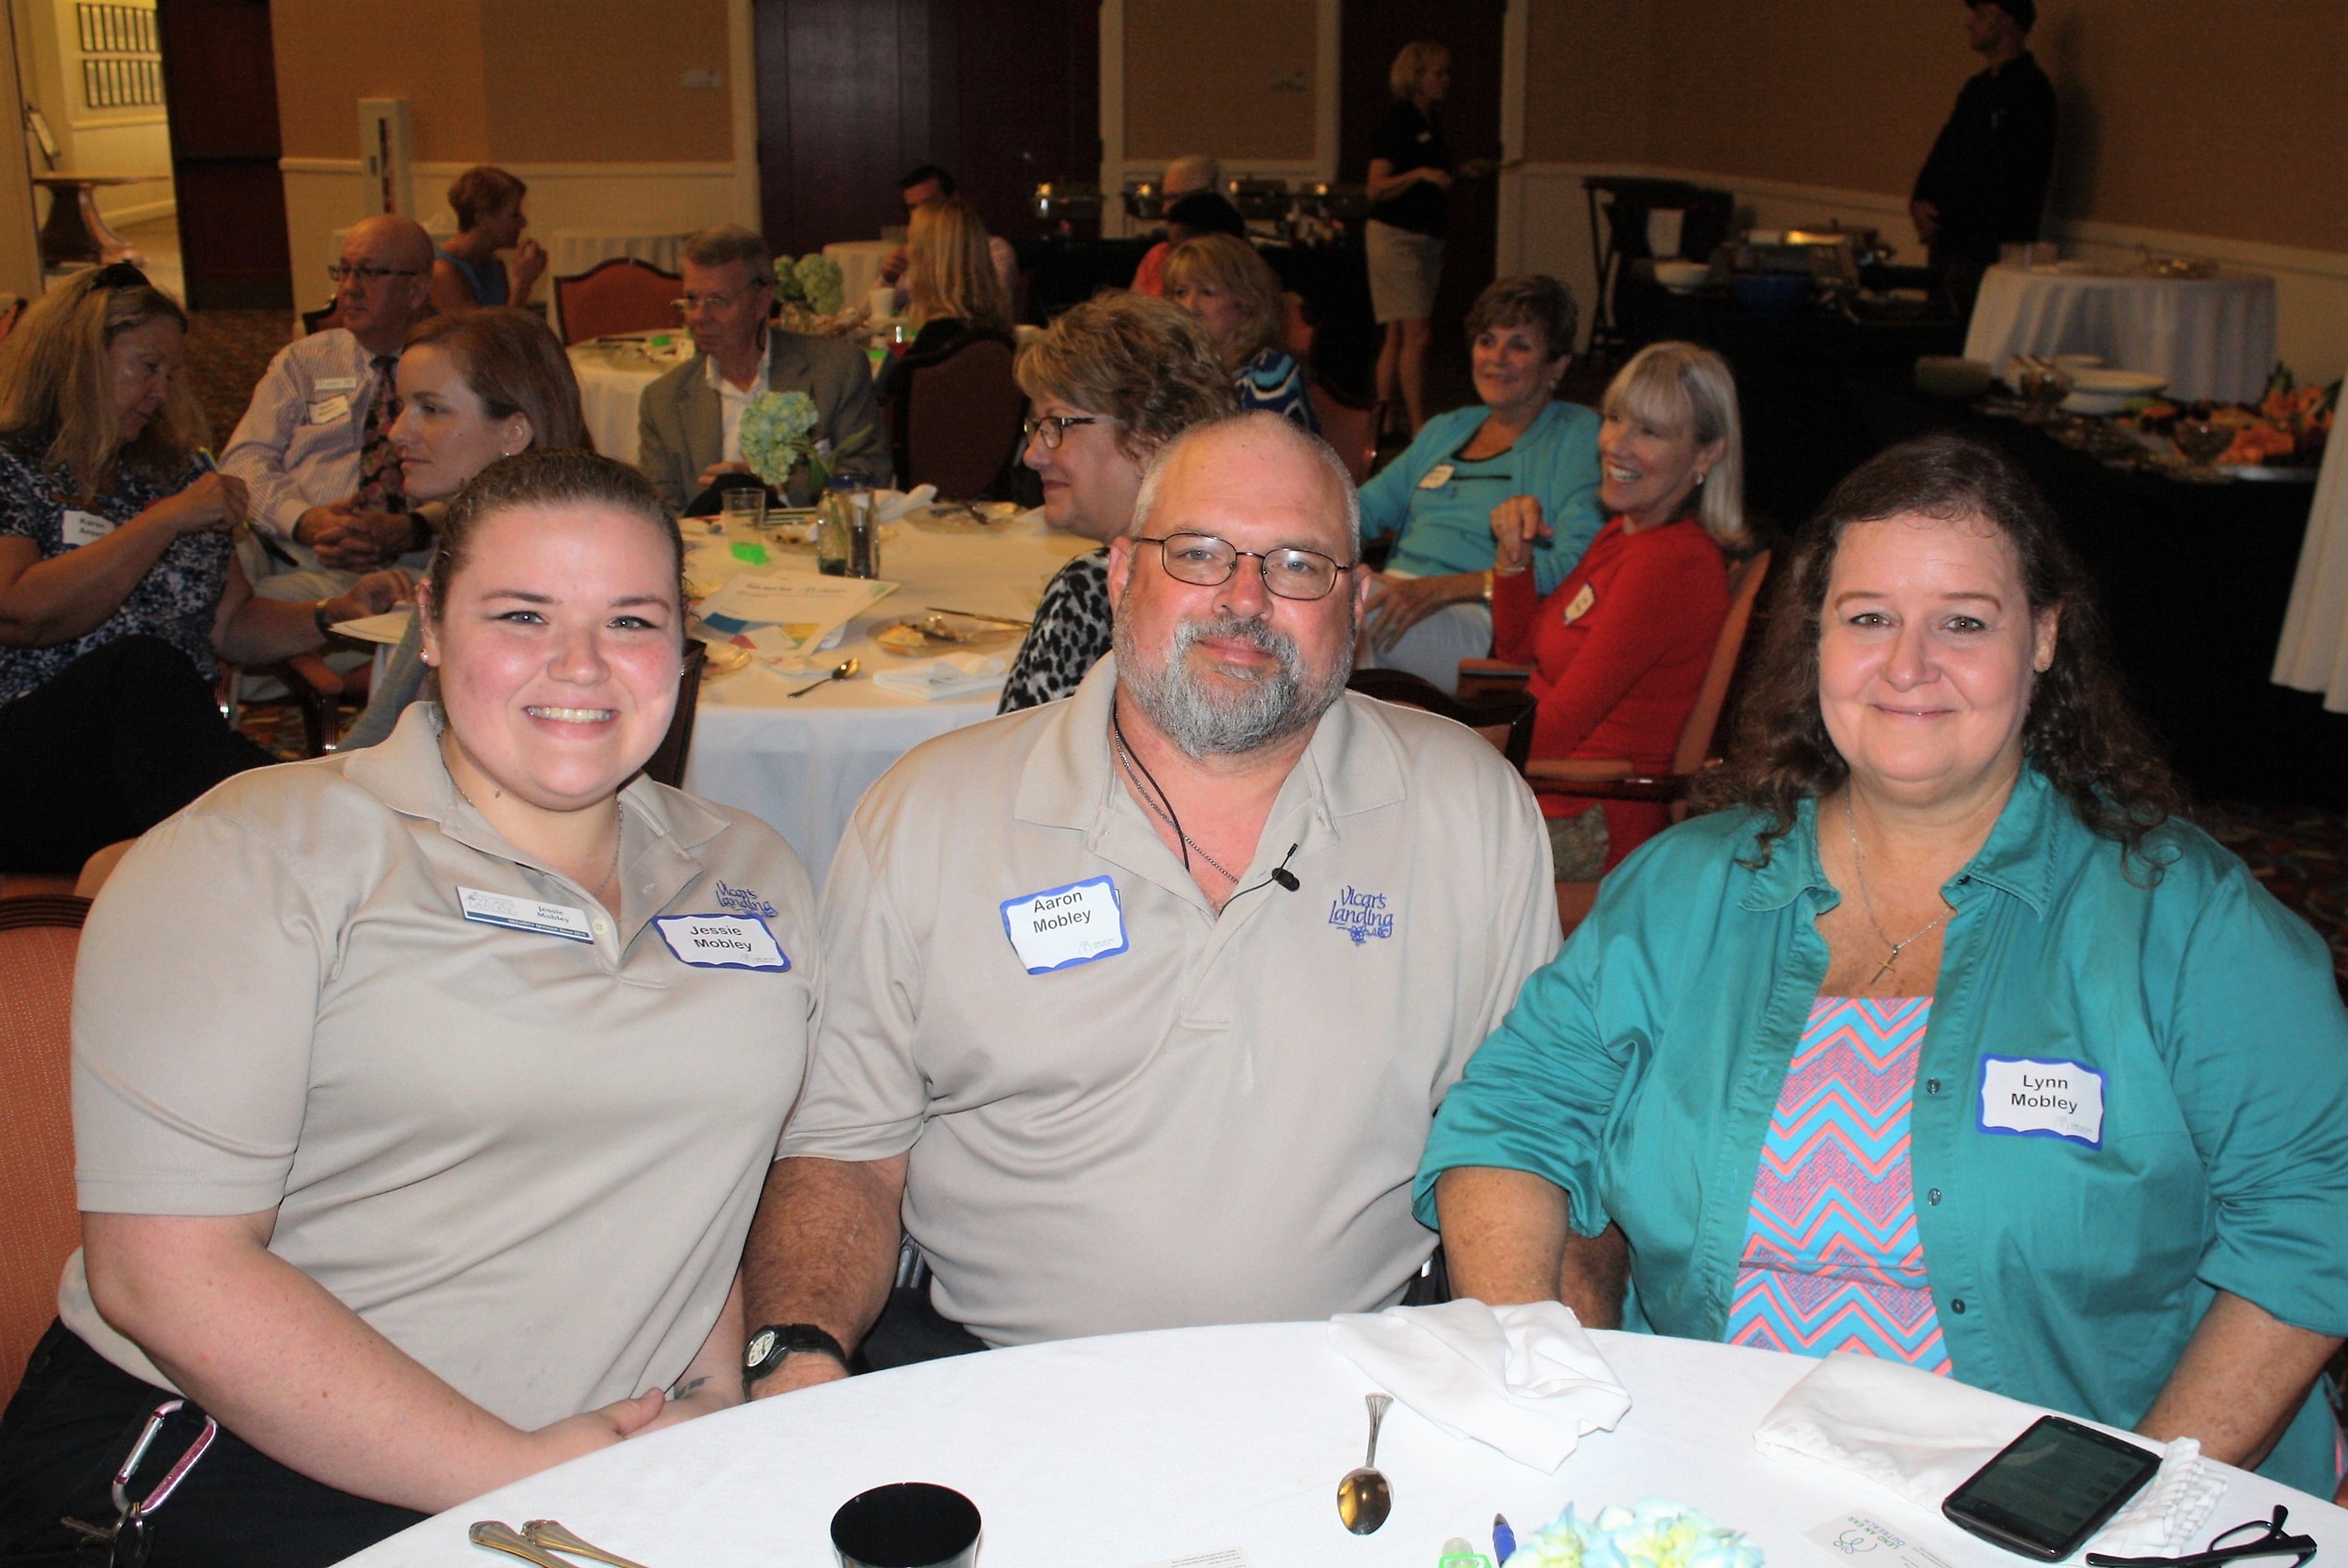 Vicar’s Landing Senior Security Officer Aaron Mobley – shown here with daughter Jessie and wife Lynn – was instrumental in forging the partnership between Vicar’s Landing and Lend an Ear Outreach, which provided him with much-needed hearing aids.